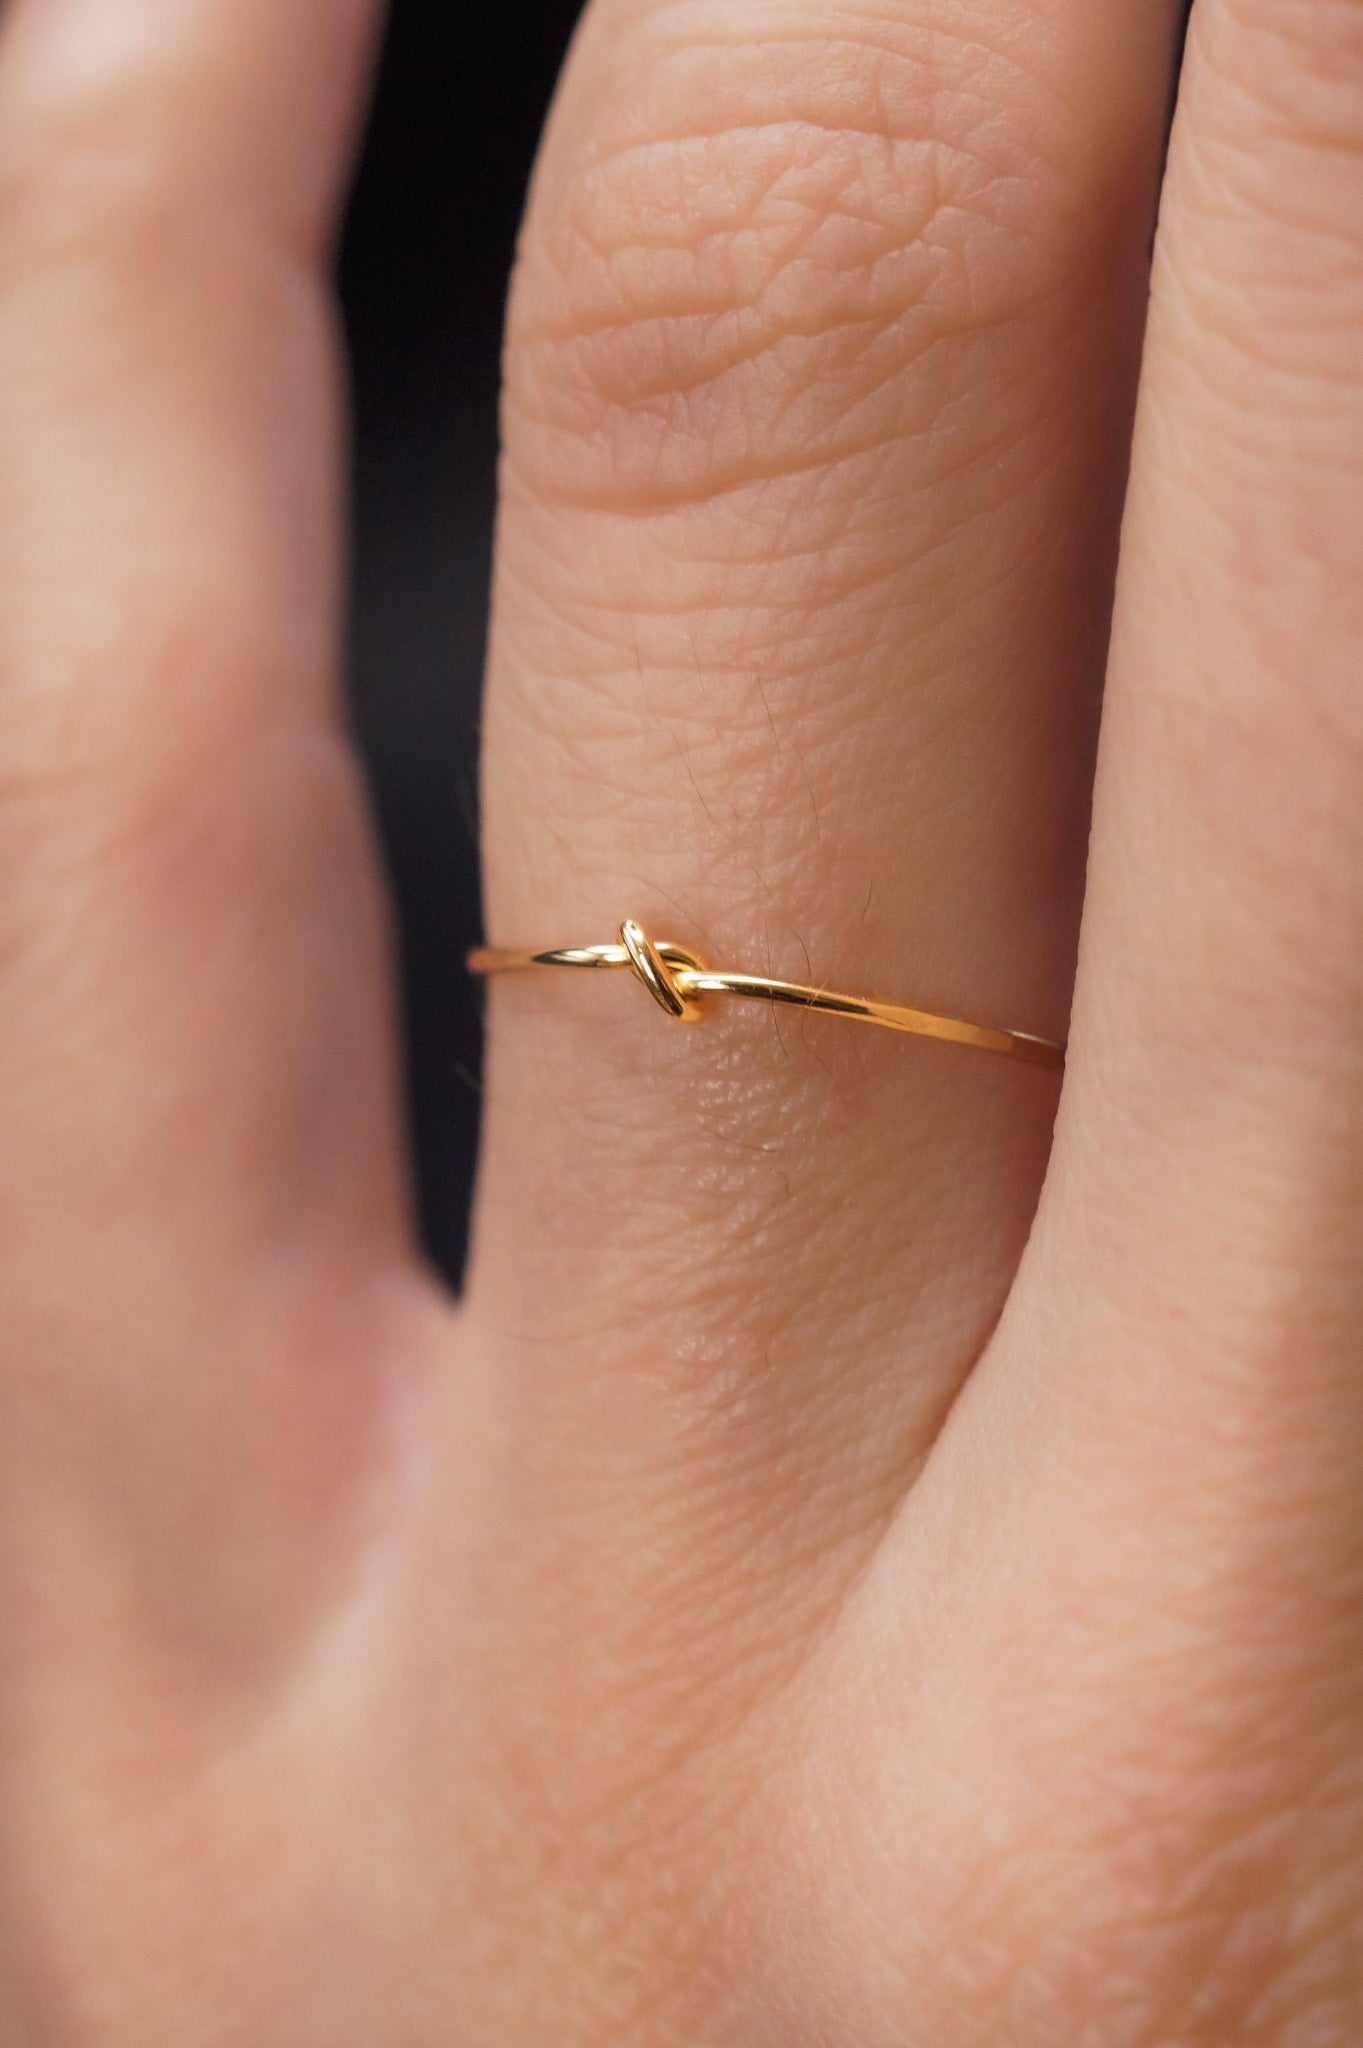 Modeled example of Ultra Thin Closed Knot Ring in 14k Gold Fill on ring finger.